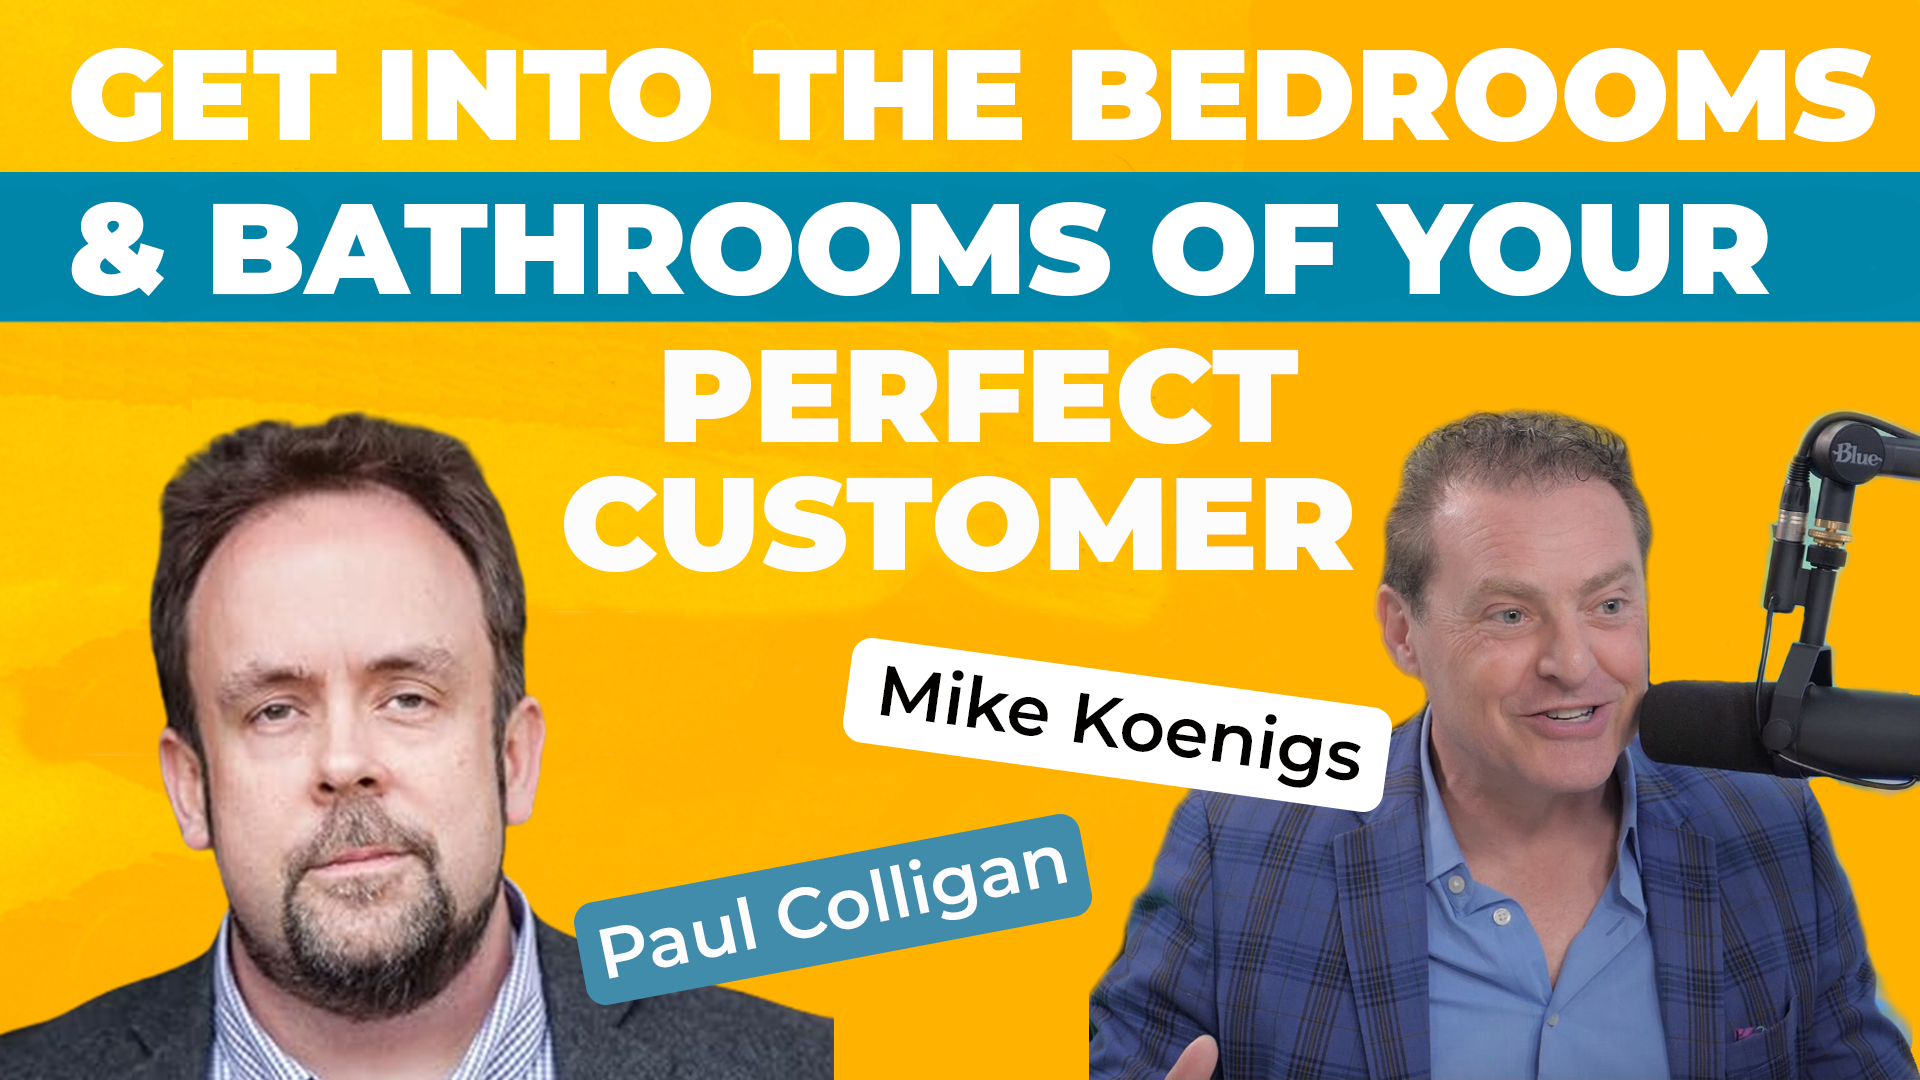 Headshots of Mike Koenigs and Paul Colligan on a bold yellow background, along with text reading "Get into the Bedrooms & Bathrooms of Your Perfect Customer"